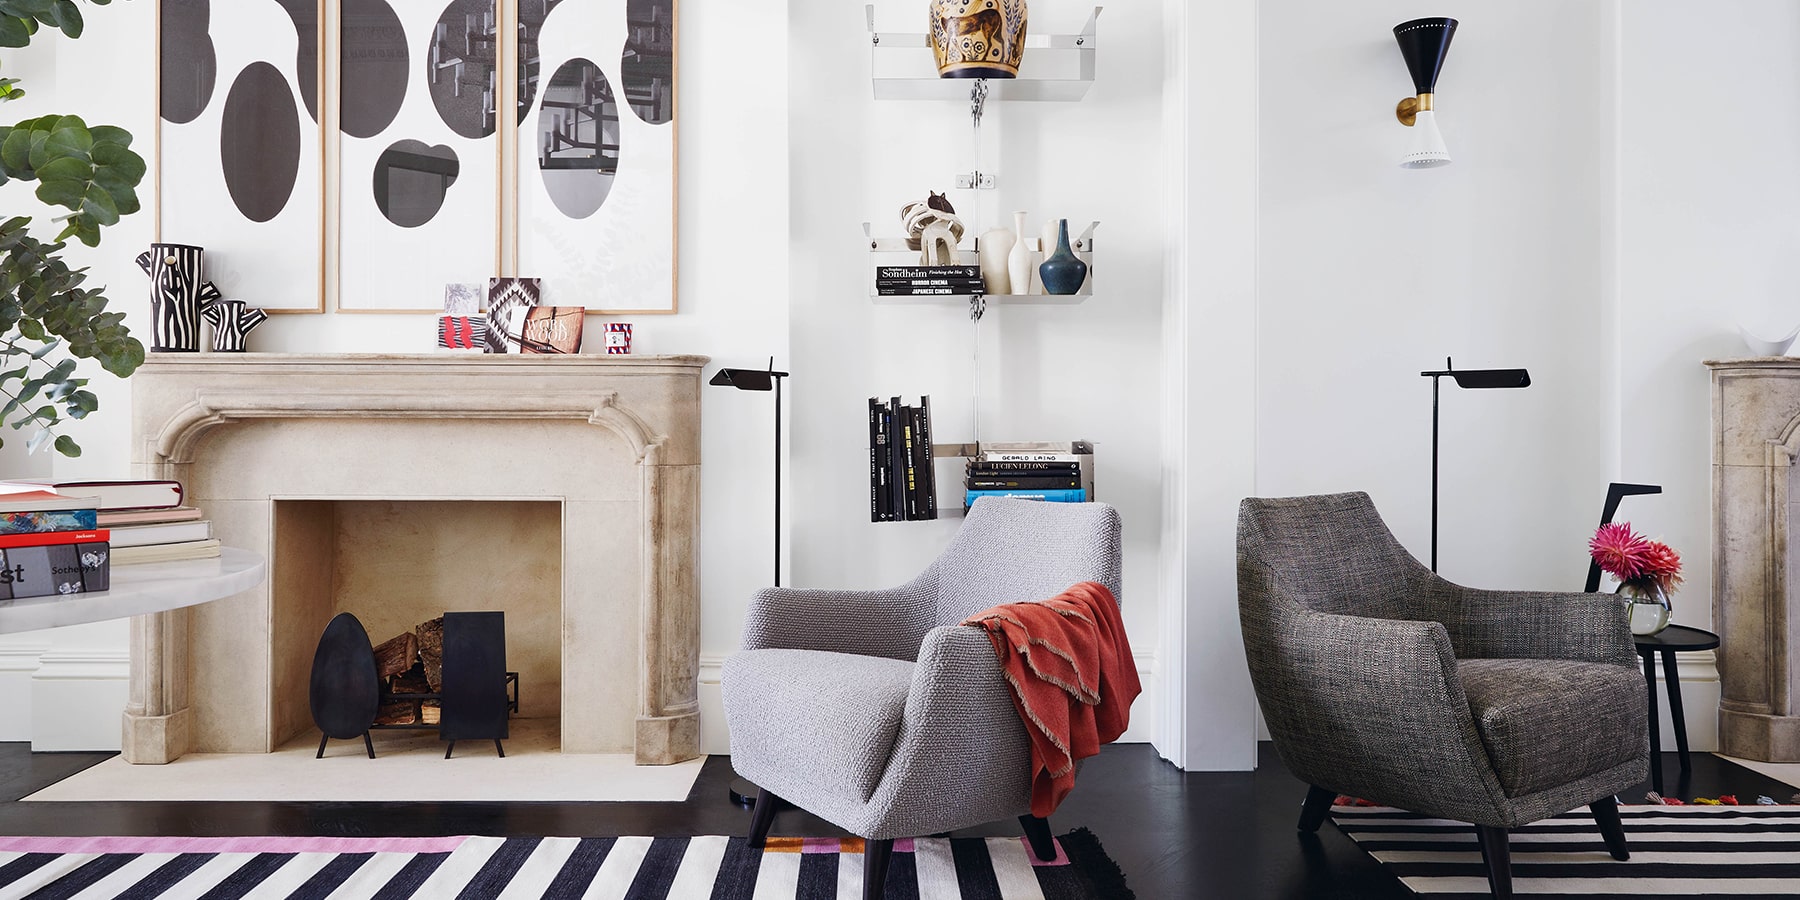 London-Based Suzy Hoodless Packs Her Spaces with Whimsy - 1stDibs ...